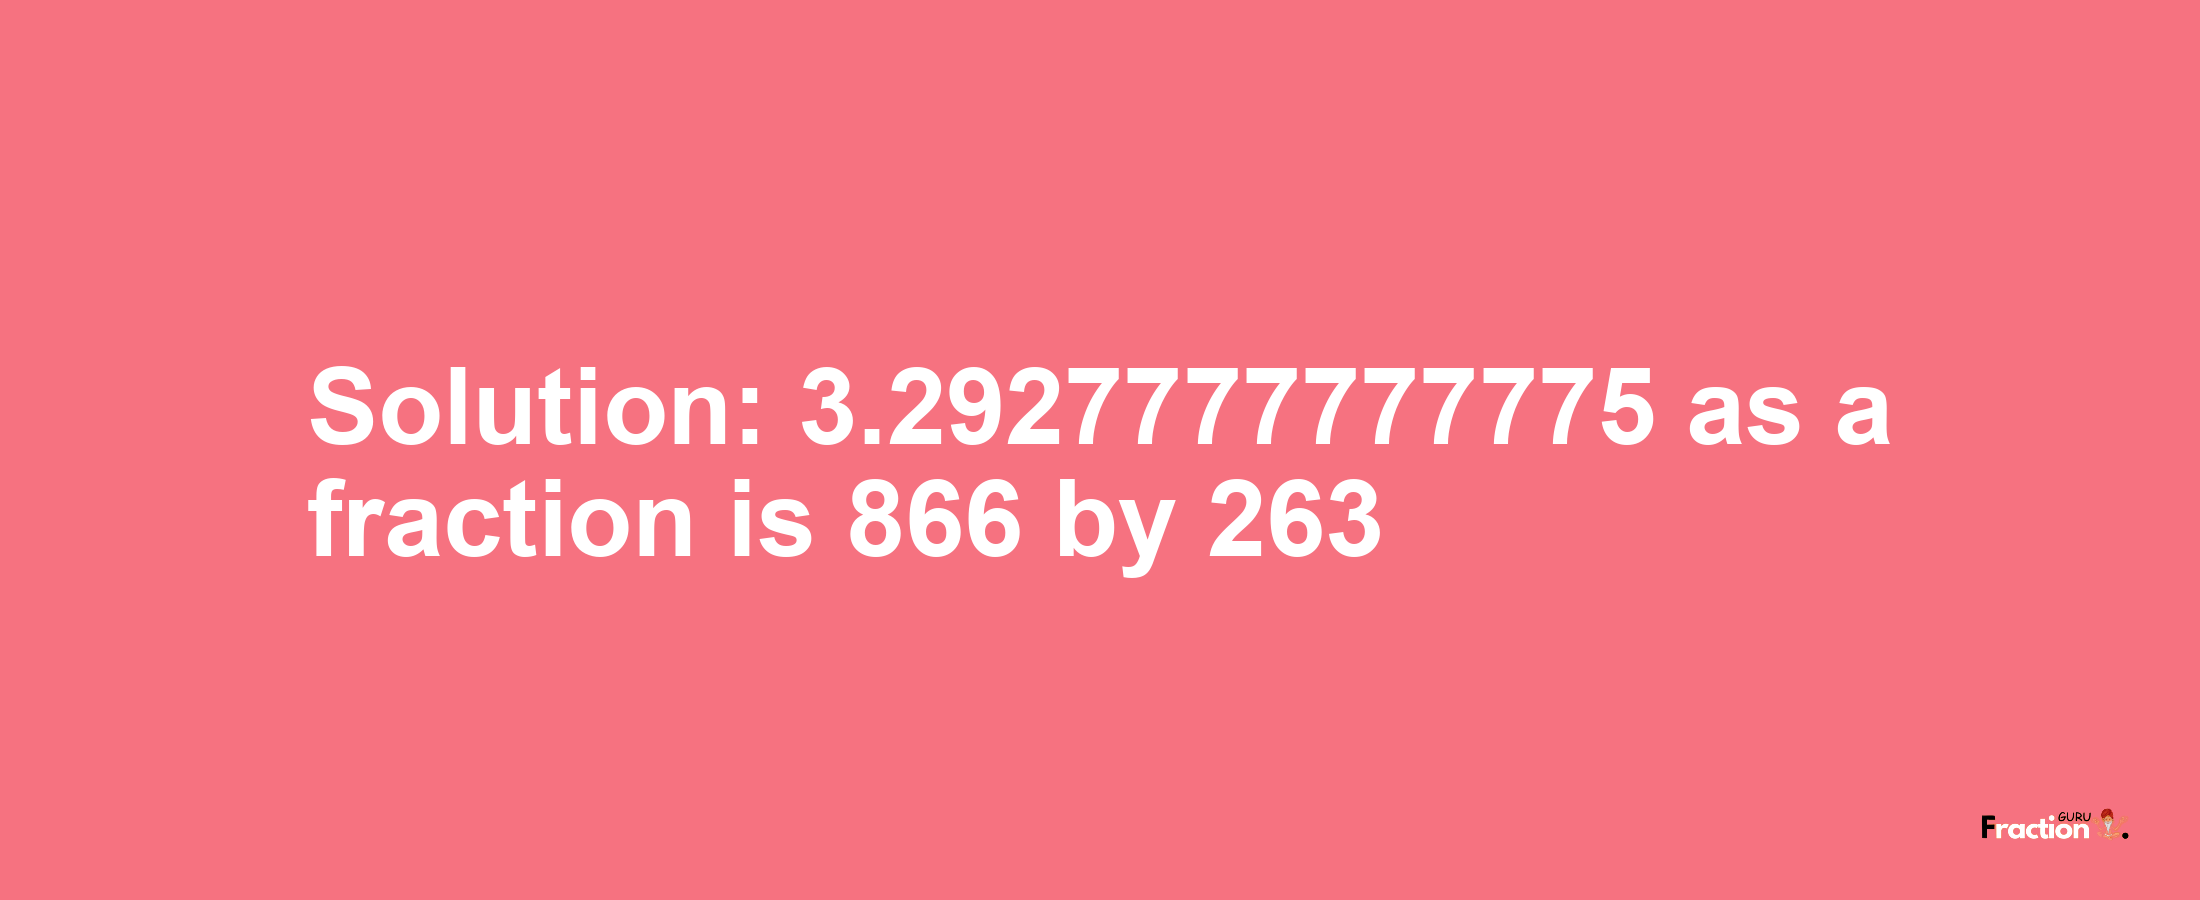 Solution:3.2927777777775 as a fraction is 866/263